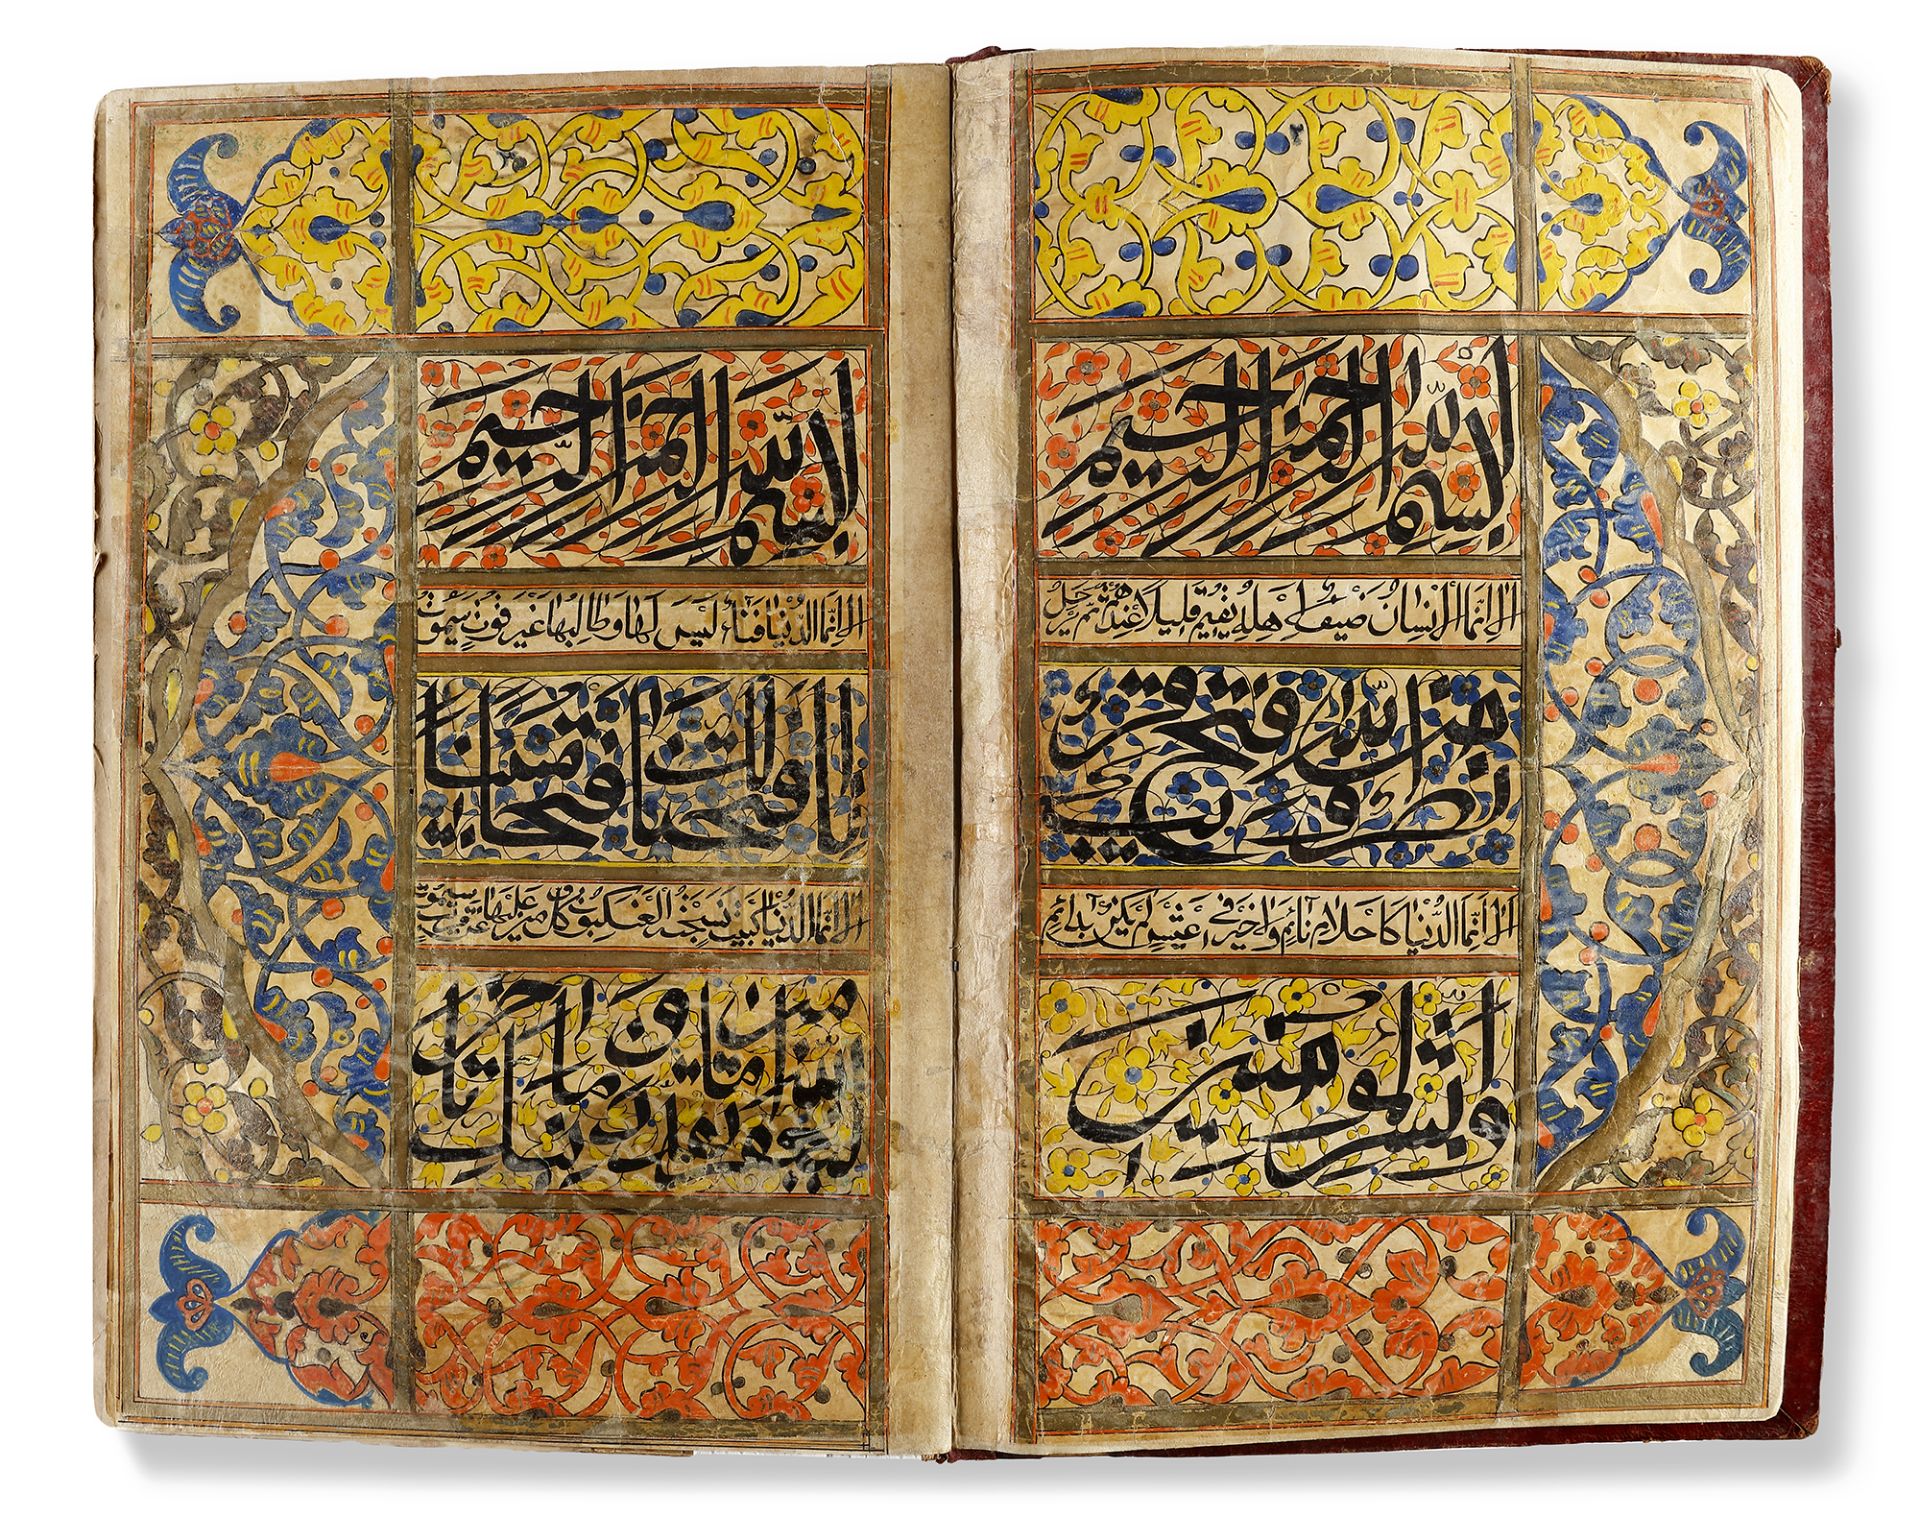 A LARGE QURAN, CENTRAL-ASIA, DAGESTAN, BY MUHHAMAD BIN KHEDR AL-KESHANI IN 1195 AH/1780 AD - Image 2 of 9